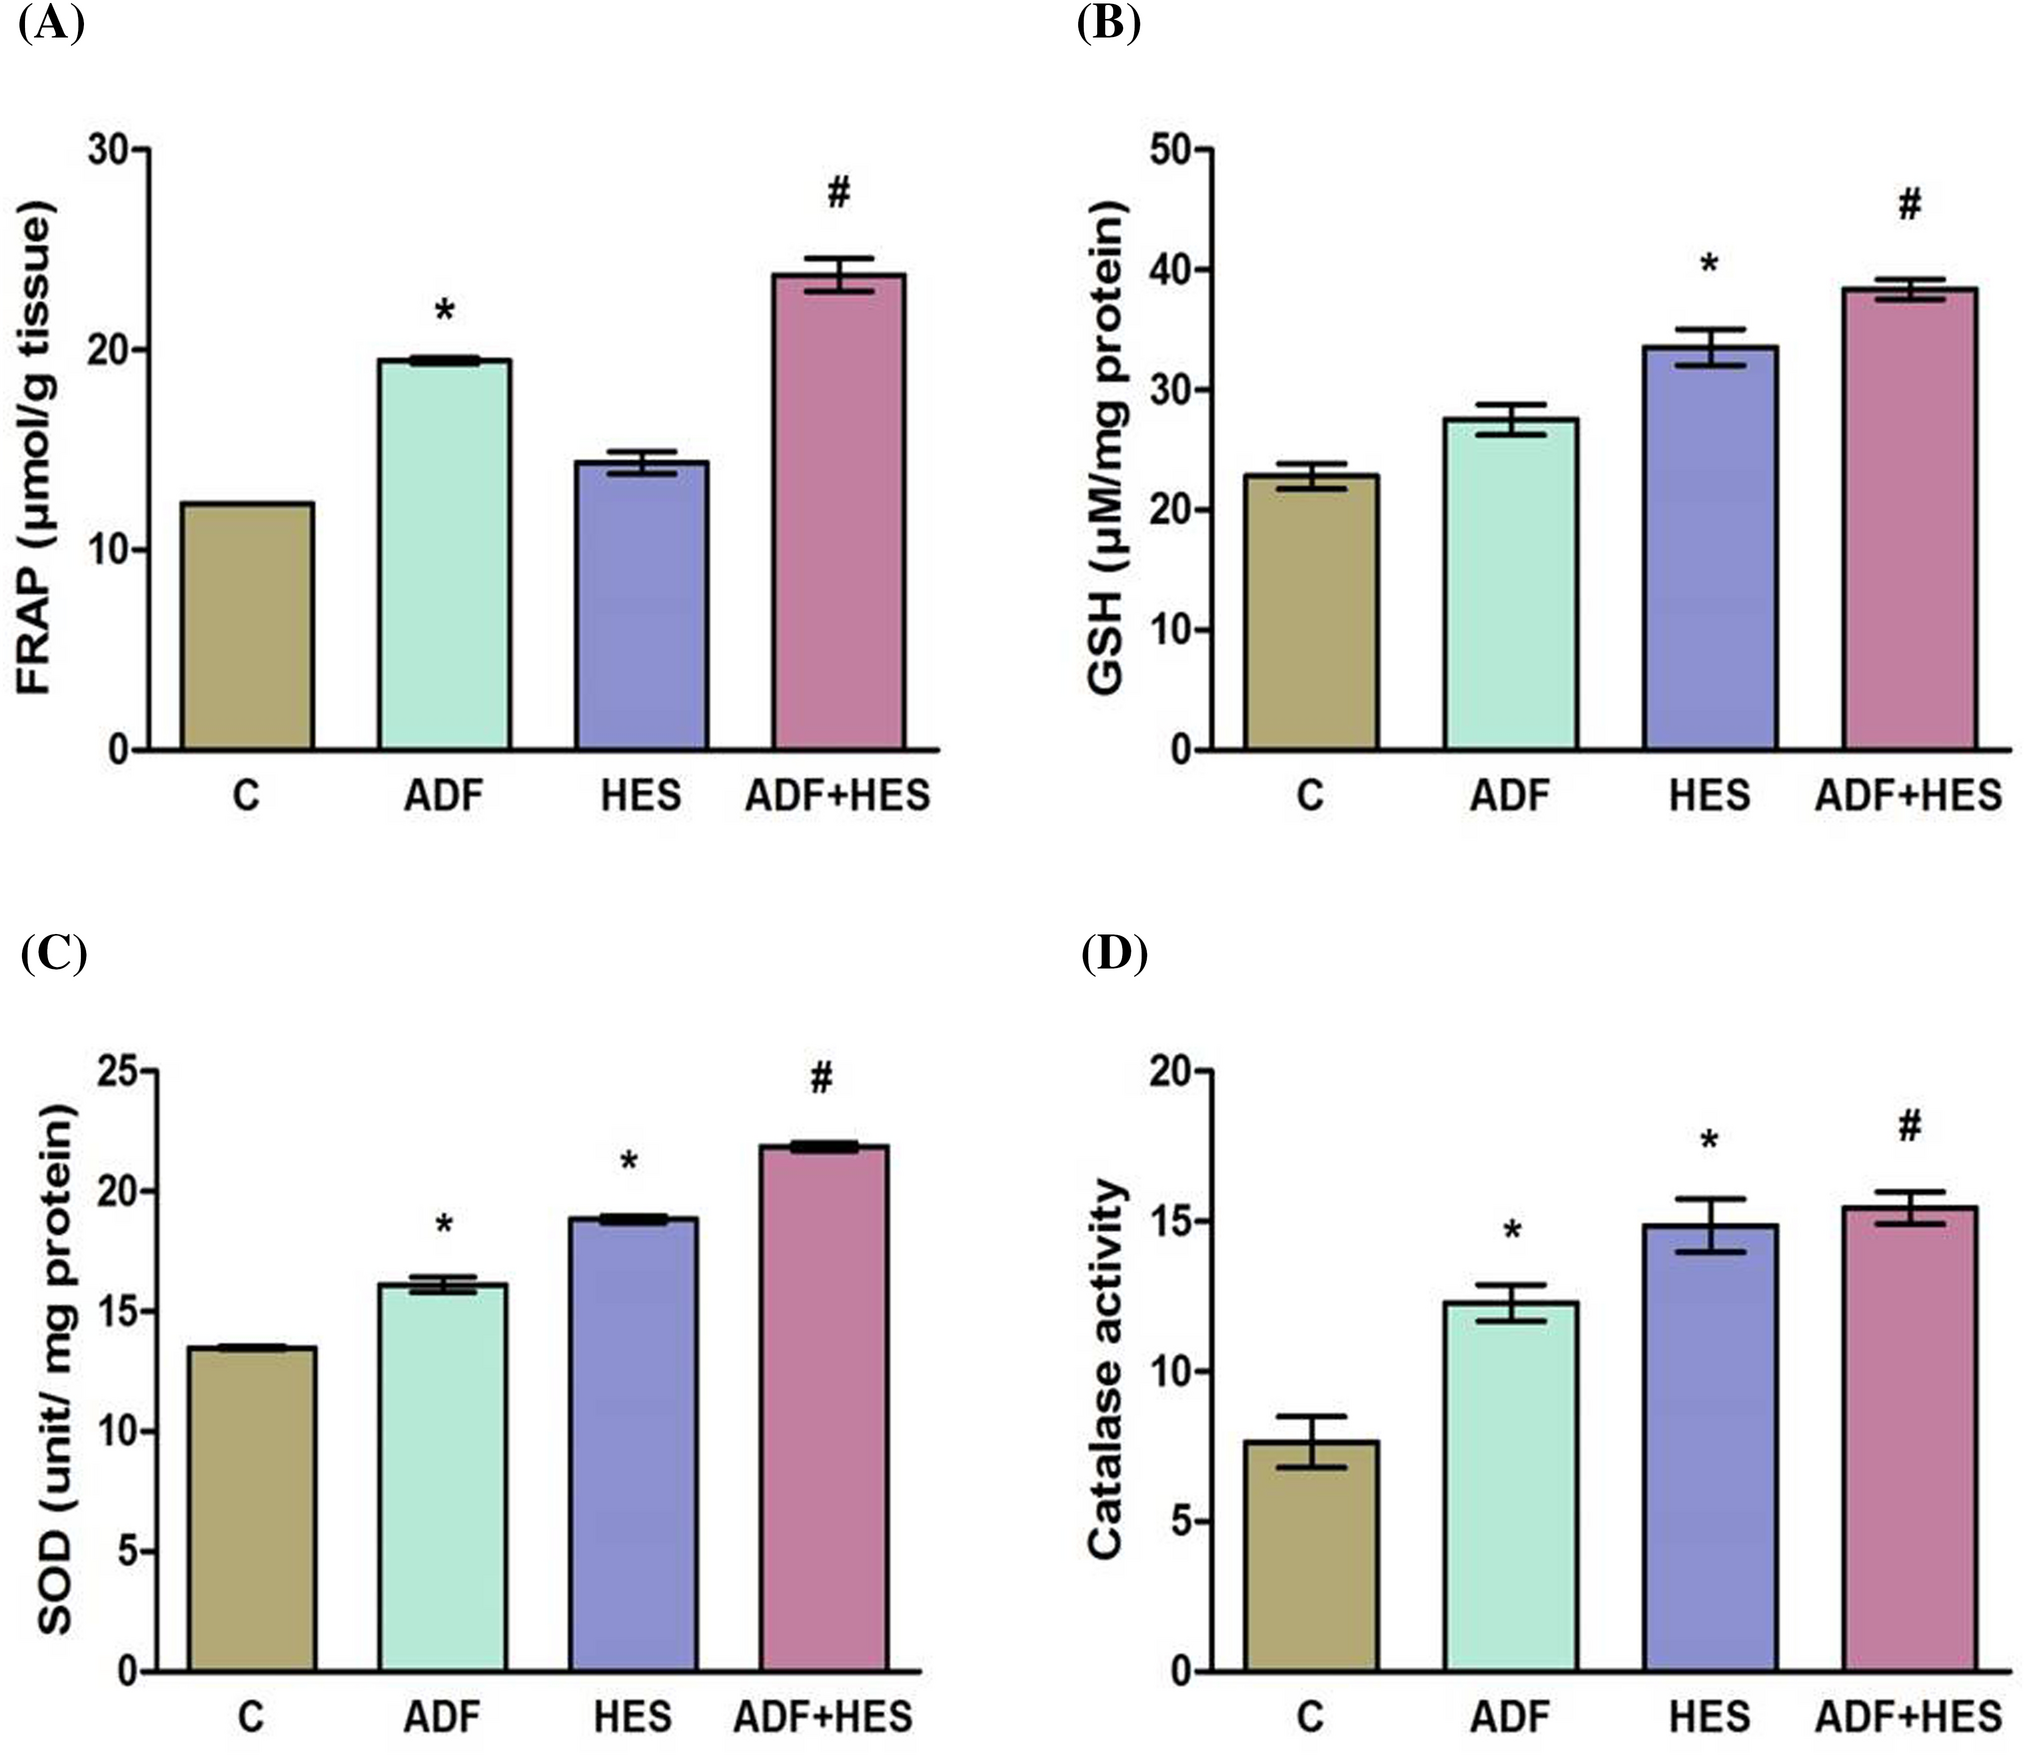 Hesperidin Supplementation During Alternate Day Fasting Provides Synergistic Effect in Conferring Neuroprotection to Aging Rats